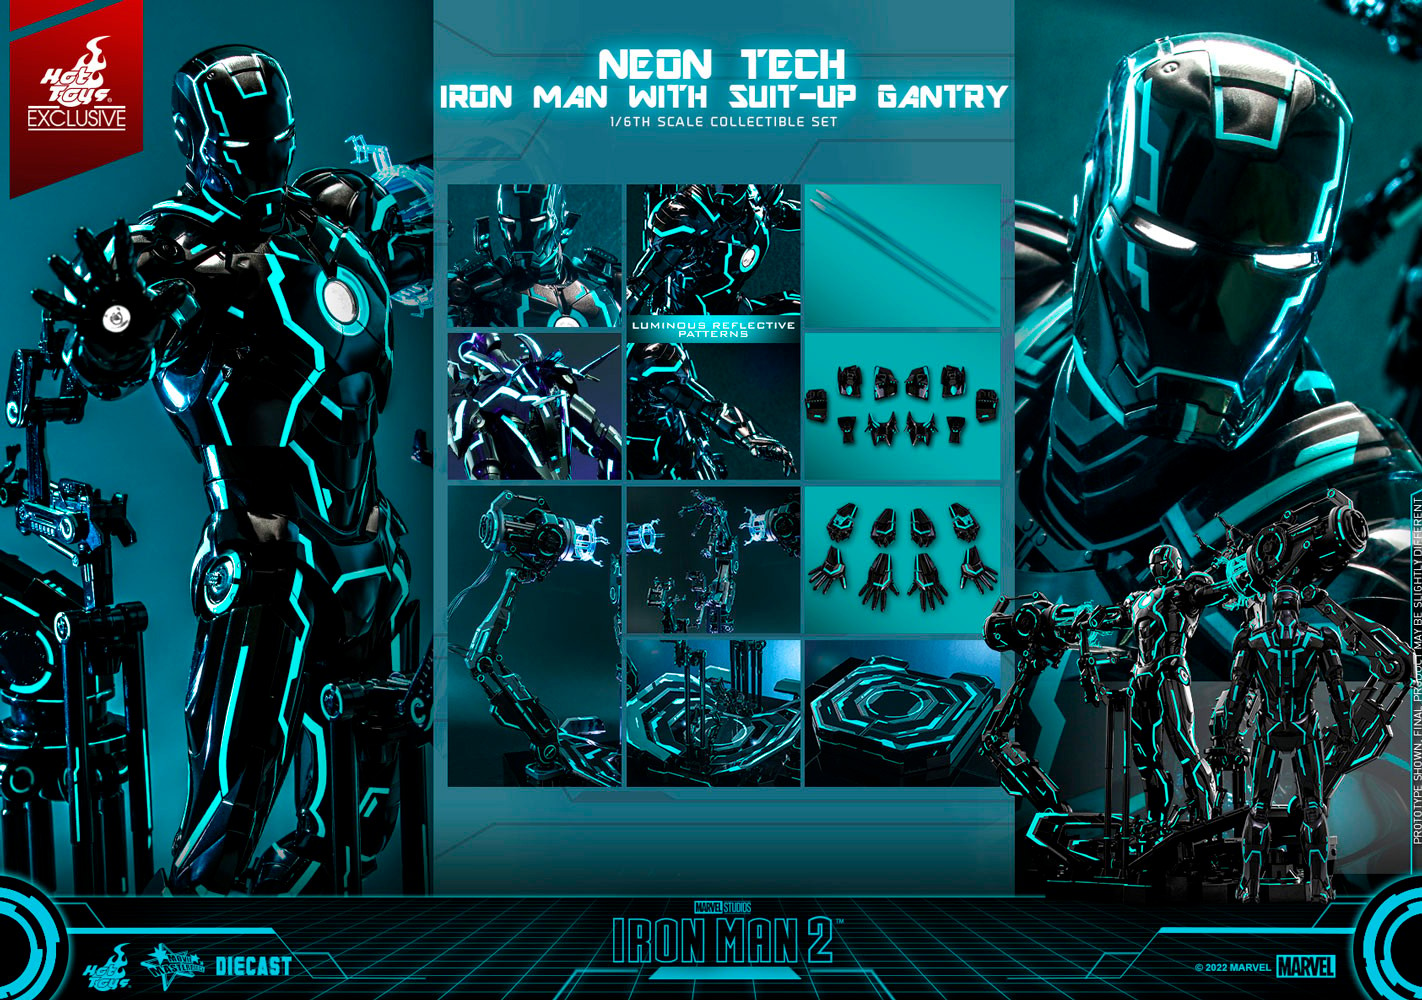 Neon Tech Iron Man with Suit-Up Gantry (Prototype Shown) View 19